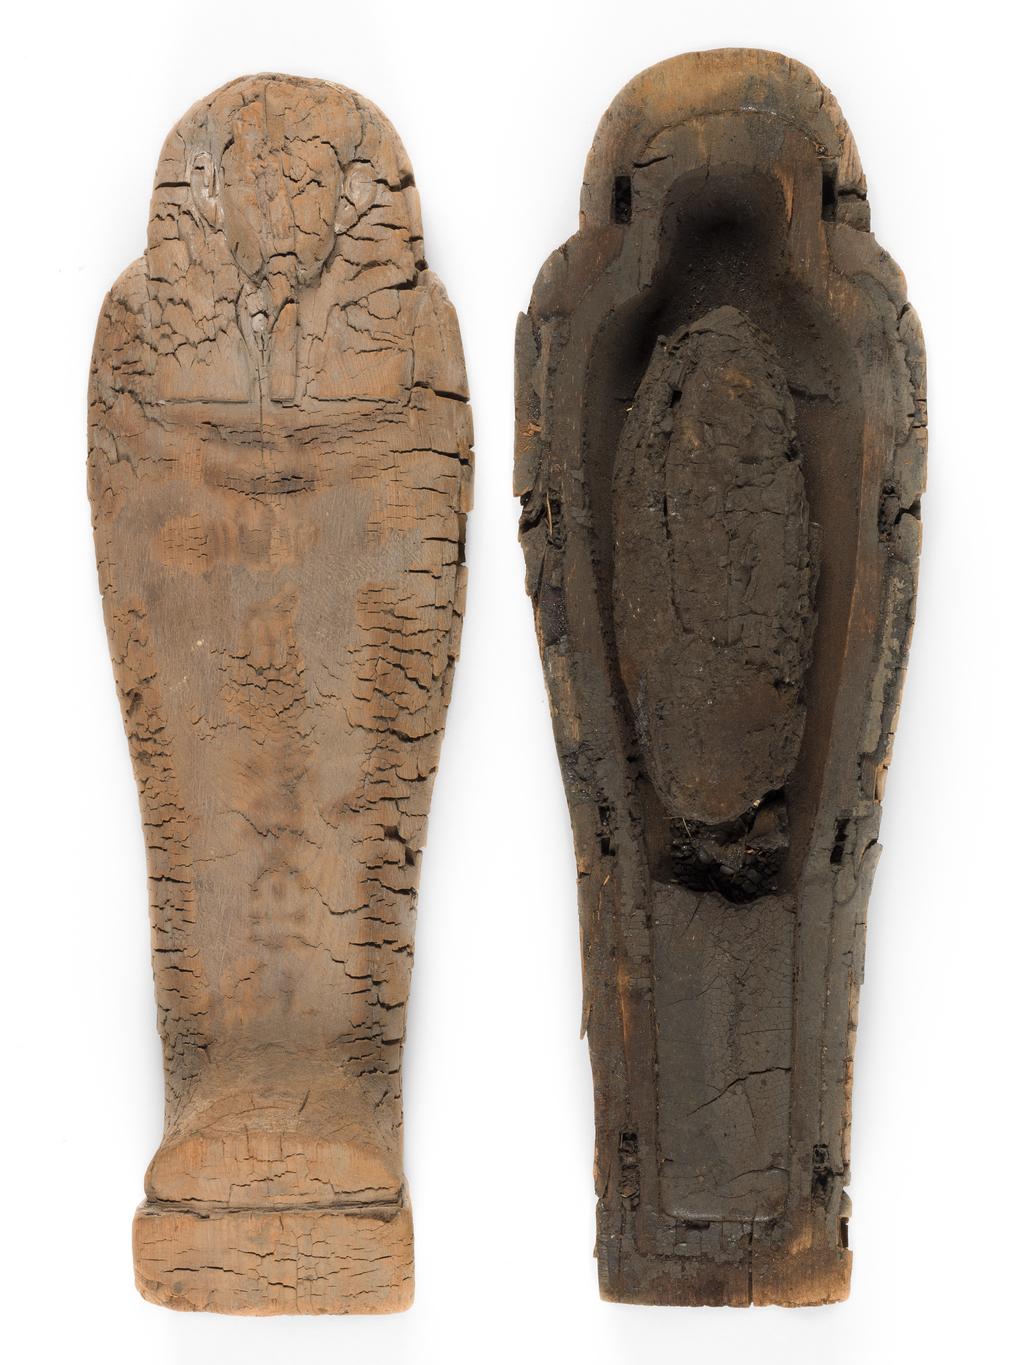 An image of Funerary Equipment. Coffin. Miniature coffin, with embalmed object, possibly the body of an infant, coated in pitch inside. Production Place: Egypt. Find Spot: Gizeh, Egypt. Wood, length 43.8 cm, width 13.4 cm, depth 14.1 cm, circa 664- circa 525 B.C. Dating not confident. Late Period.